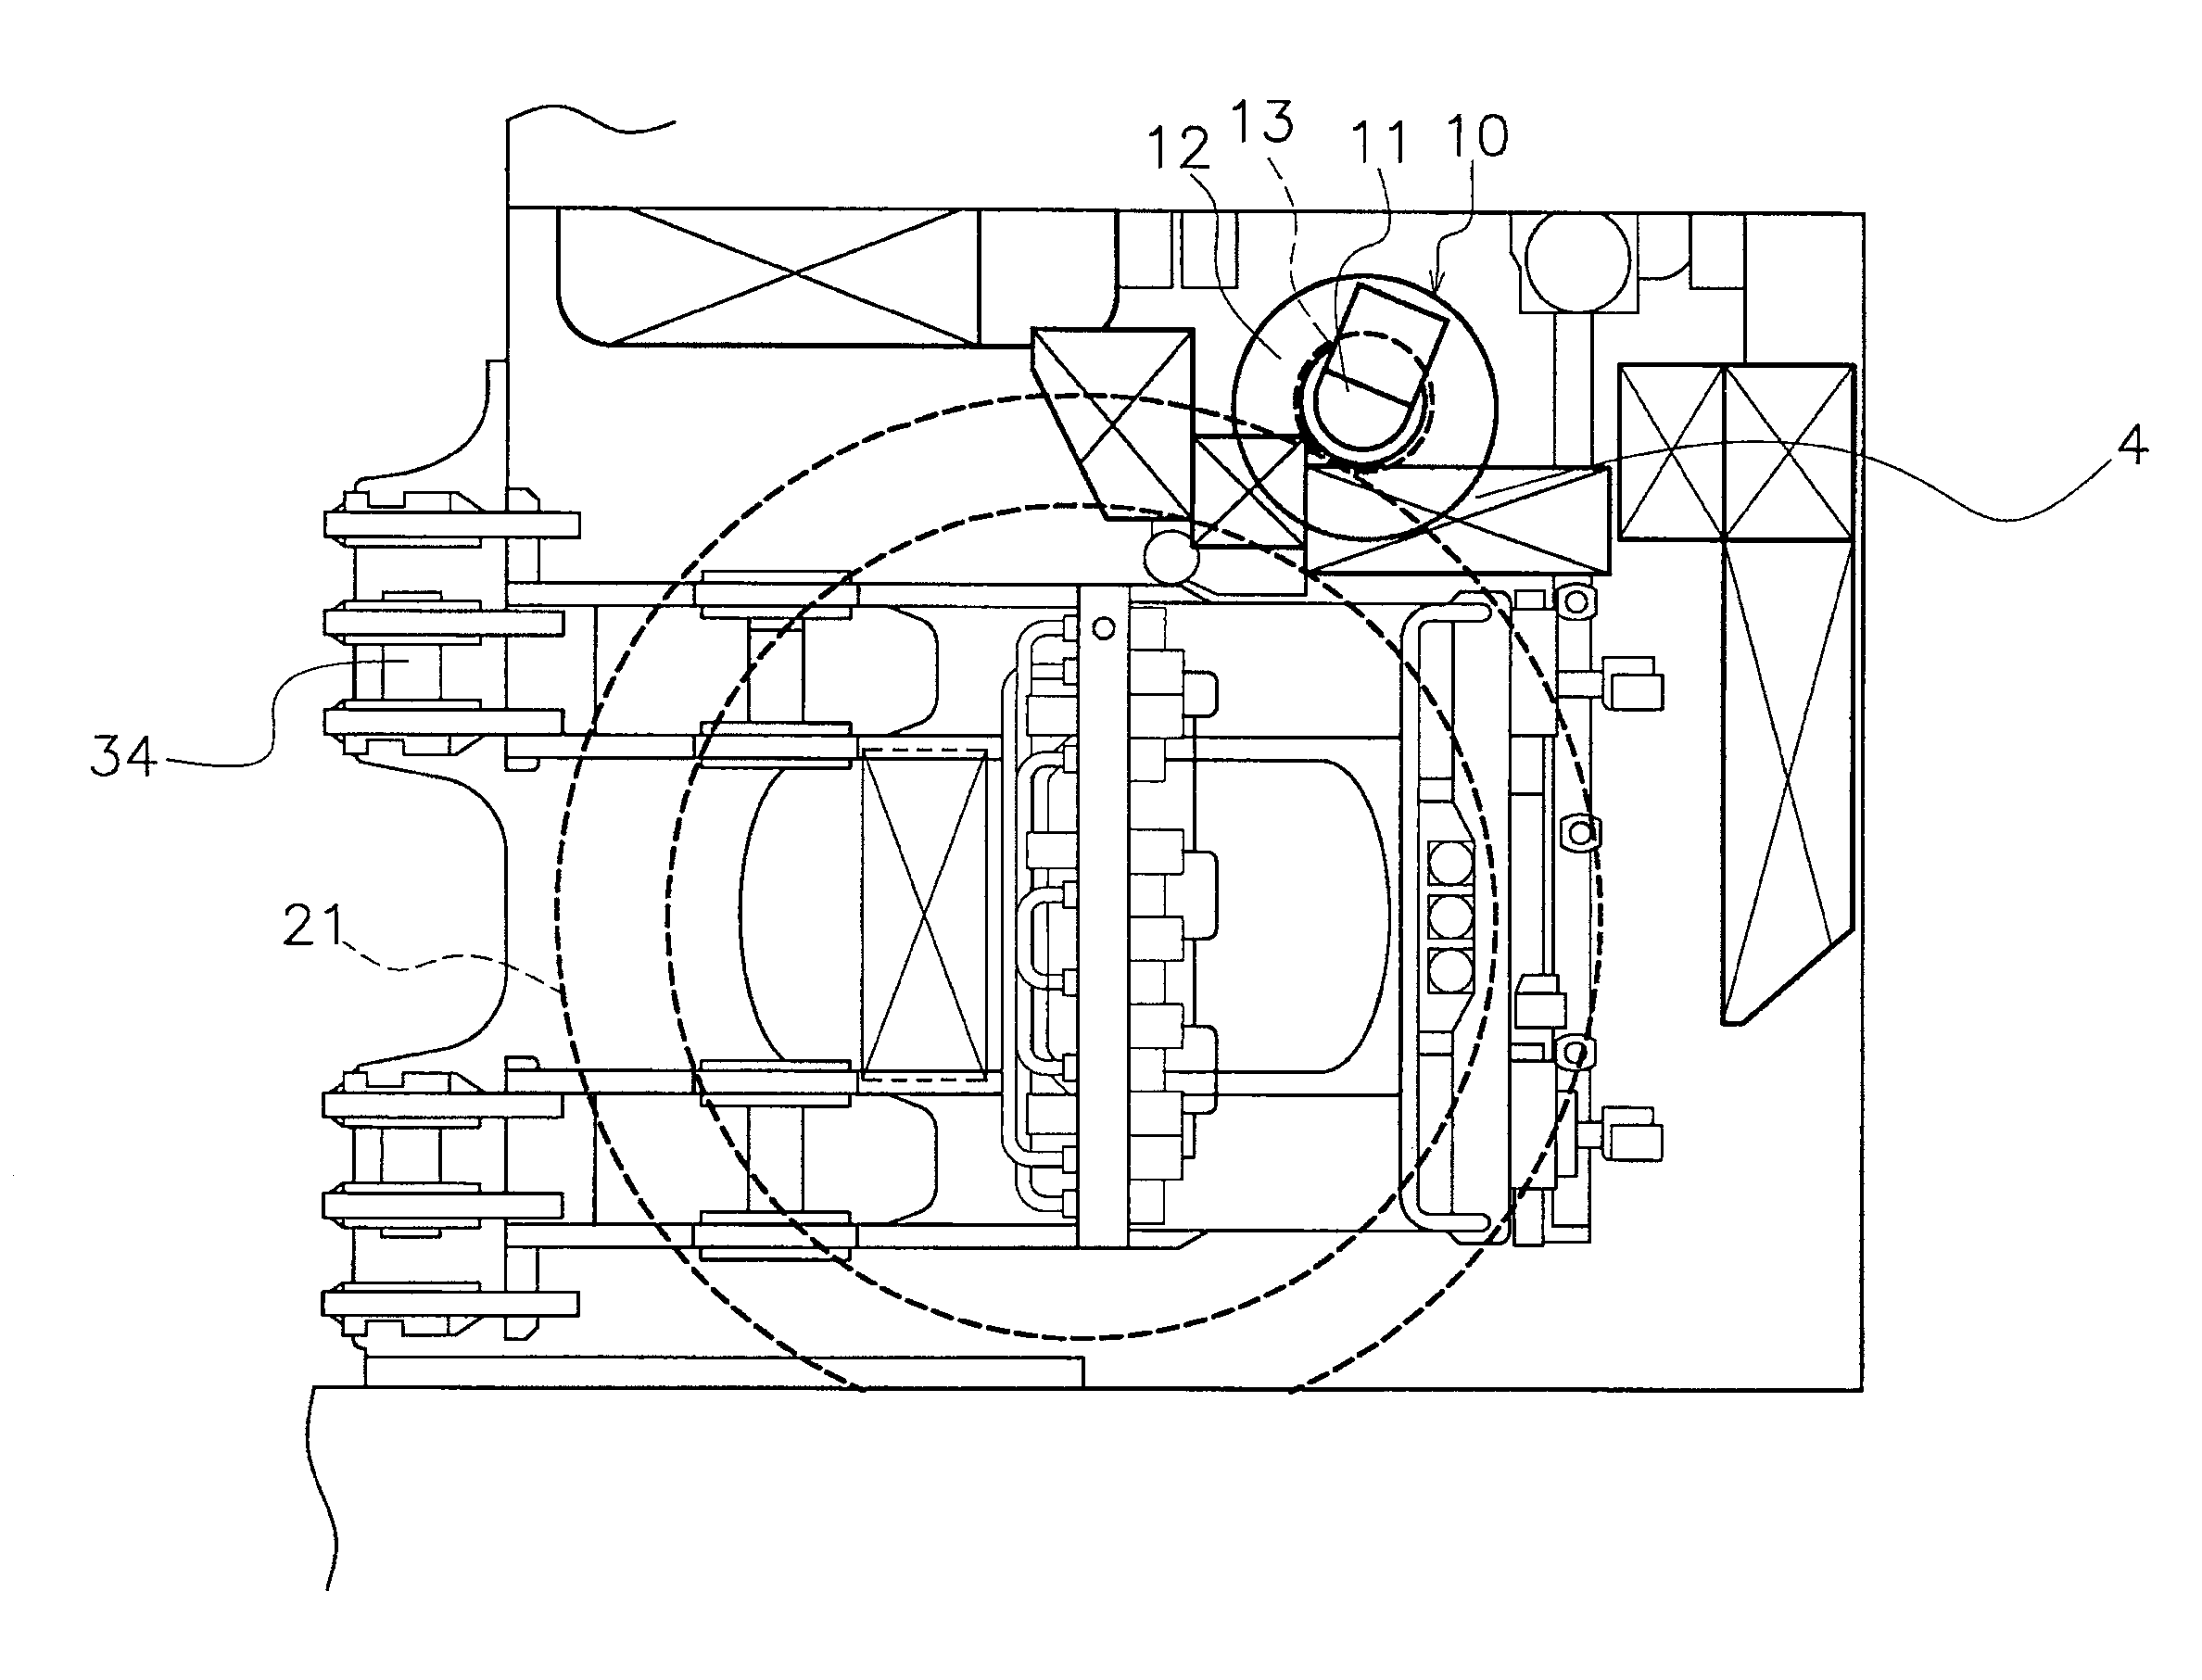 Revolving apparatus for work vehicle